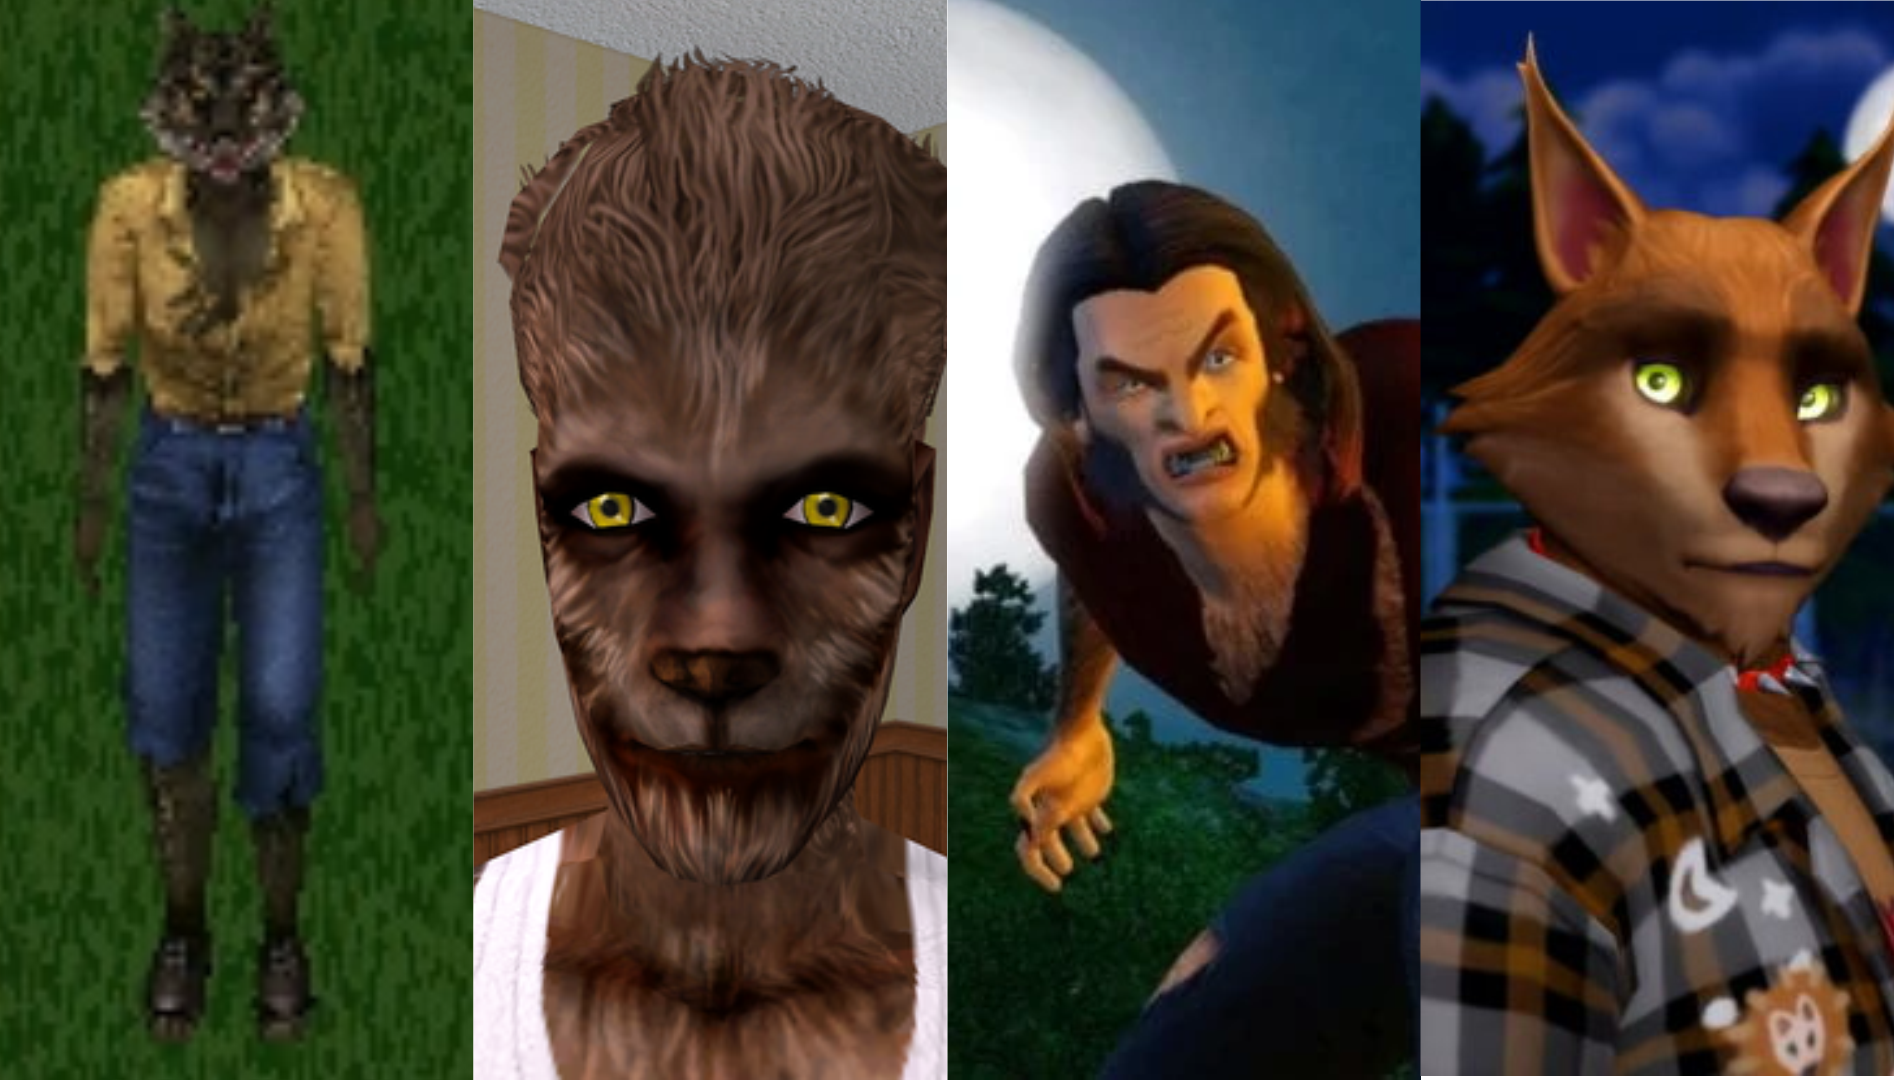 Sims 4 Werewolves: The developers showed us the new pack and this is all you need to know!